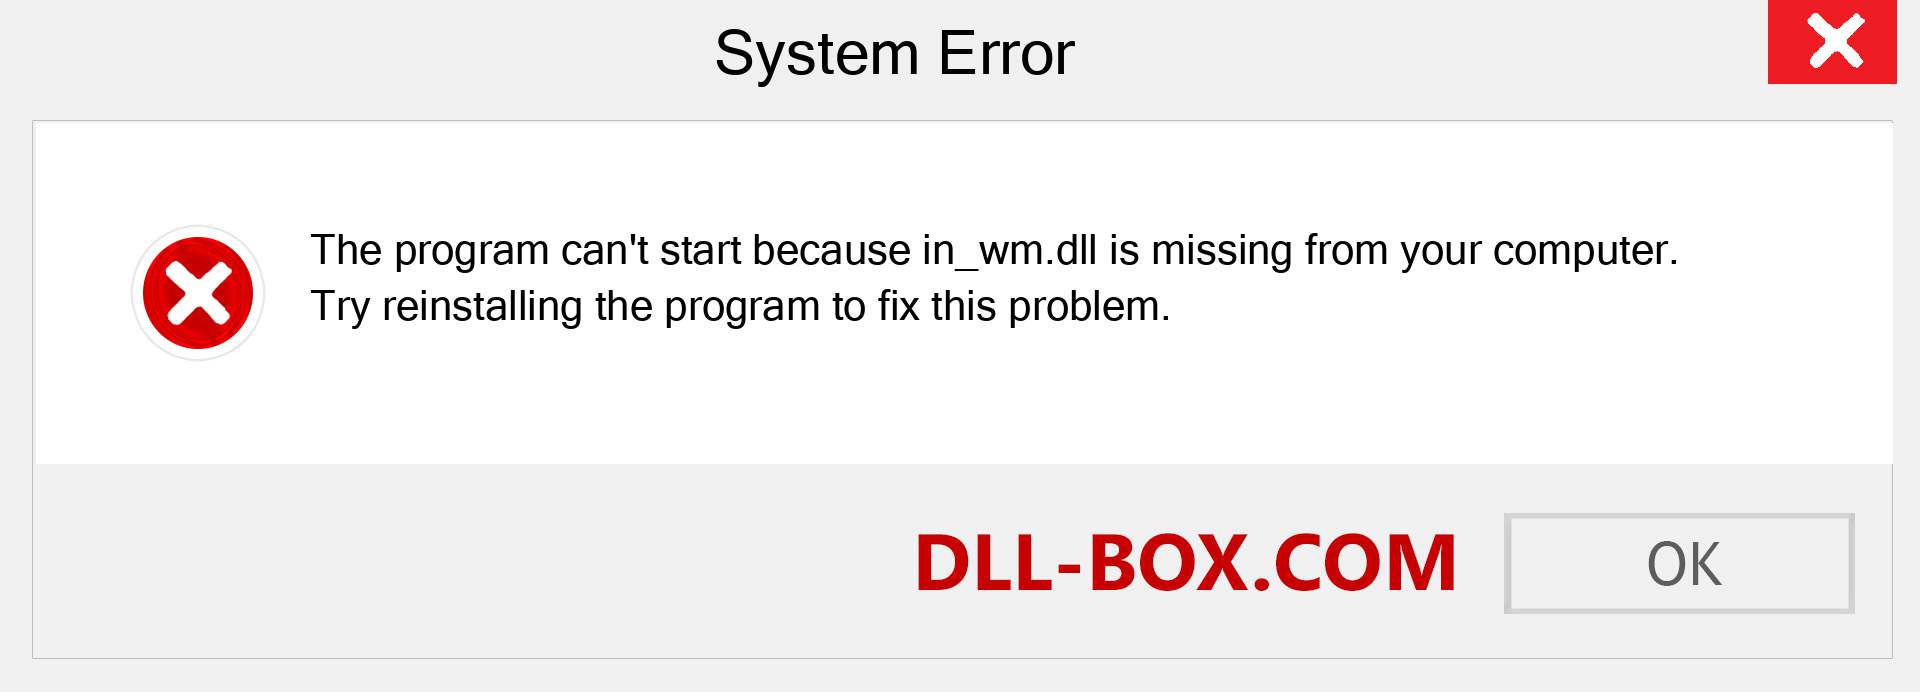  in_wm.dll file is missing?. Download for Windows 7, 8, 10 - Fix  in_wm dll Missing Error on Windows, photos, images